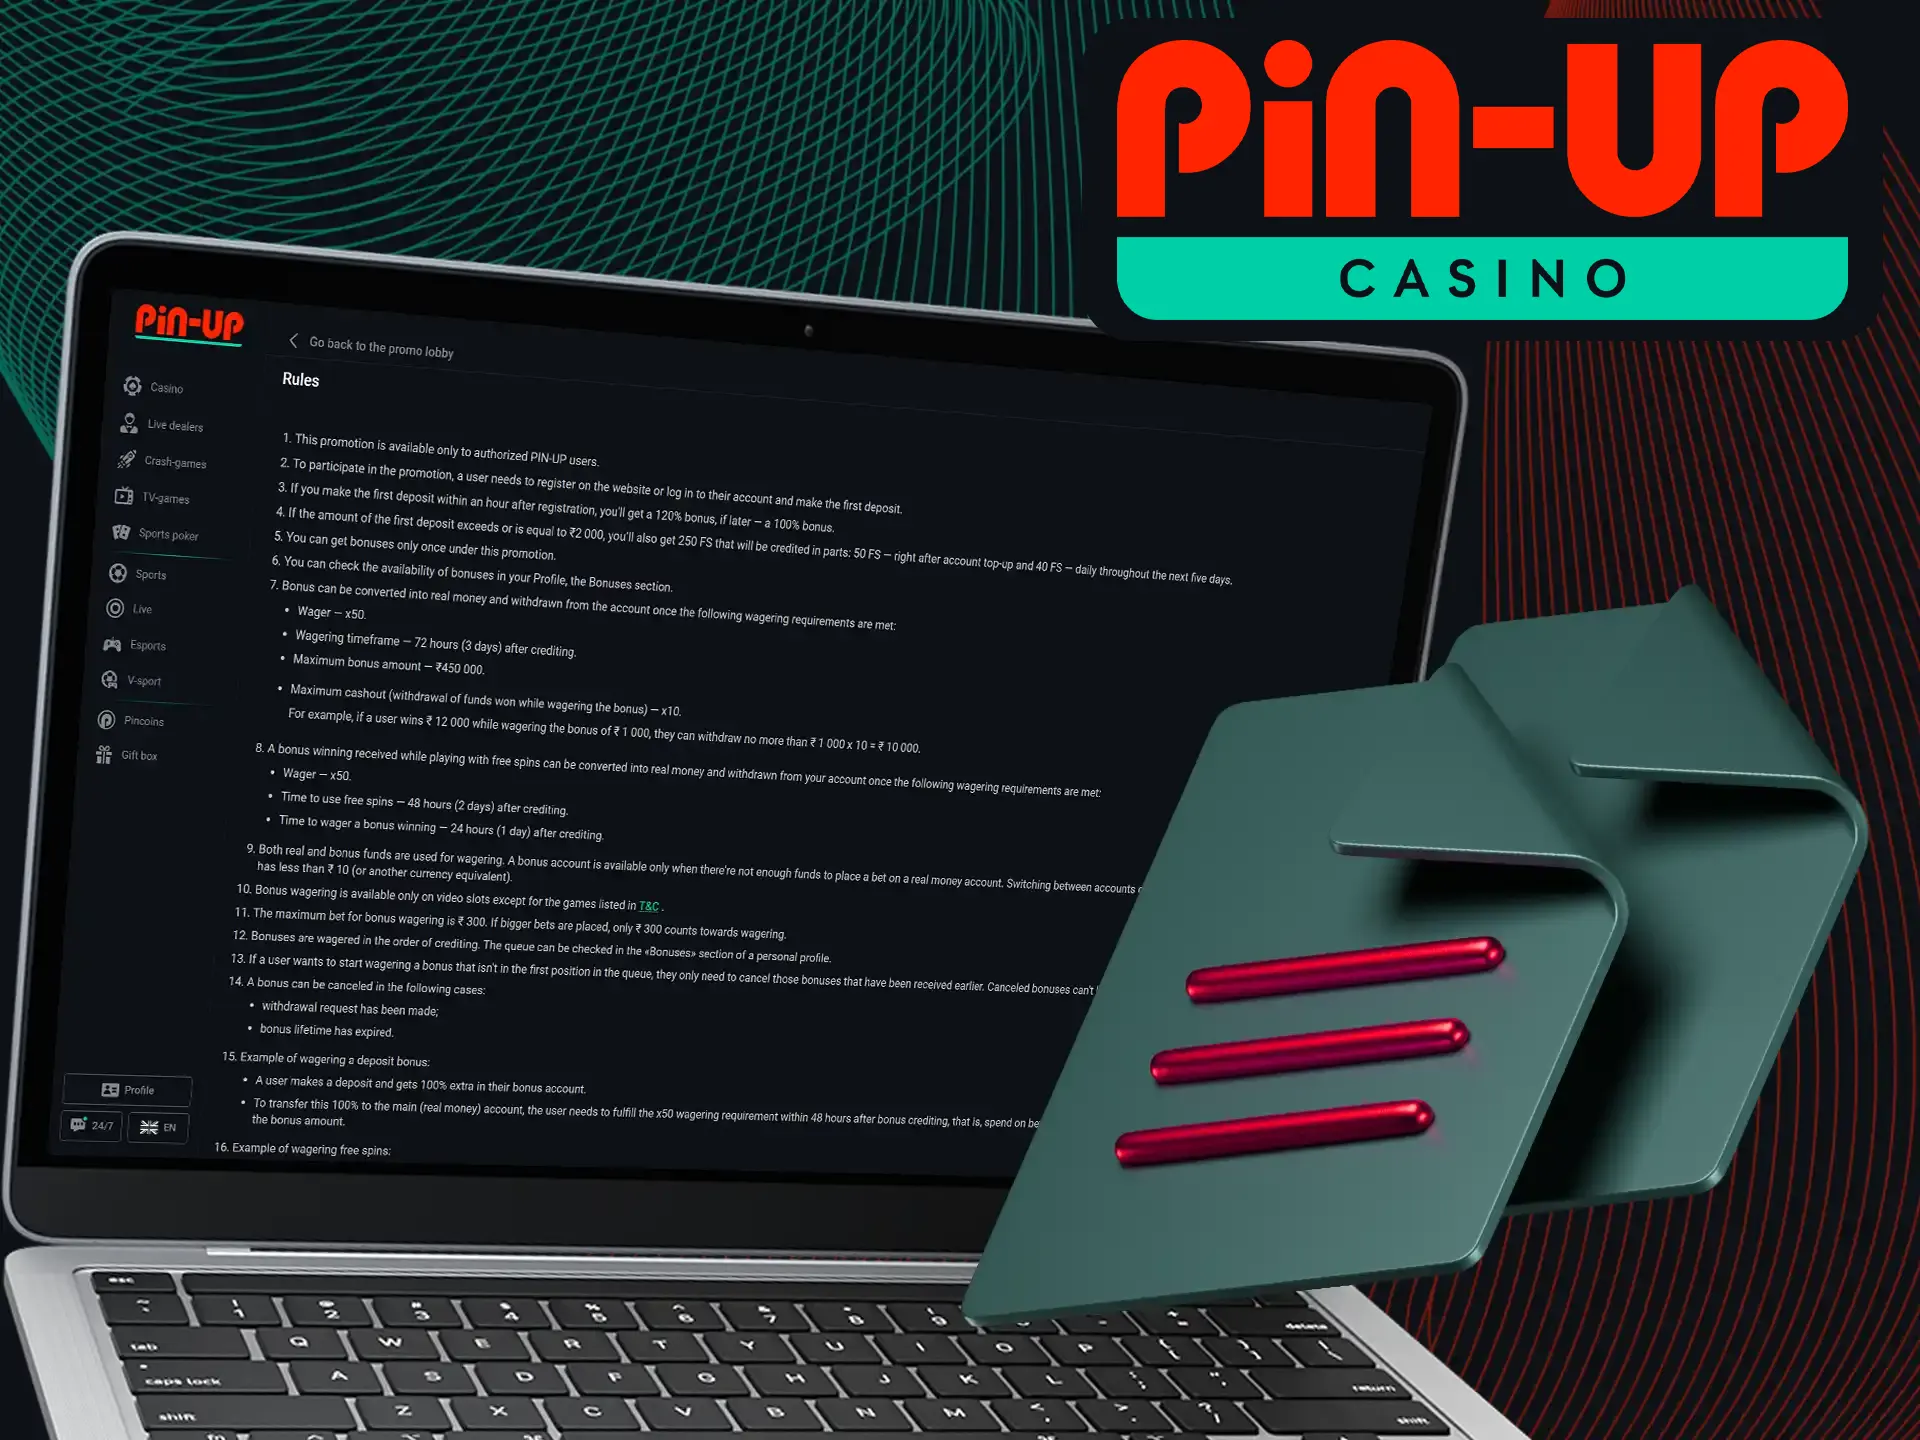 Make sure to review the Terms and Conditions before participating in this promotion на Pin-Up Casino.